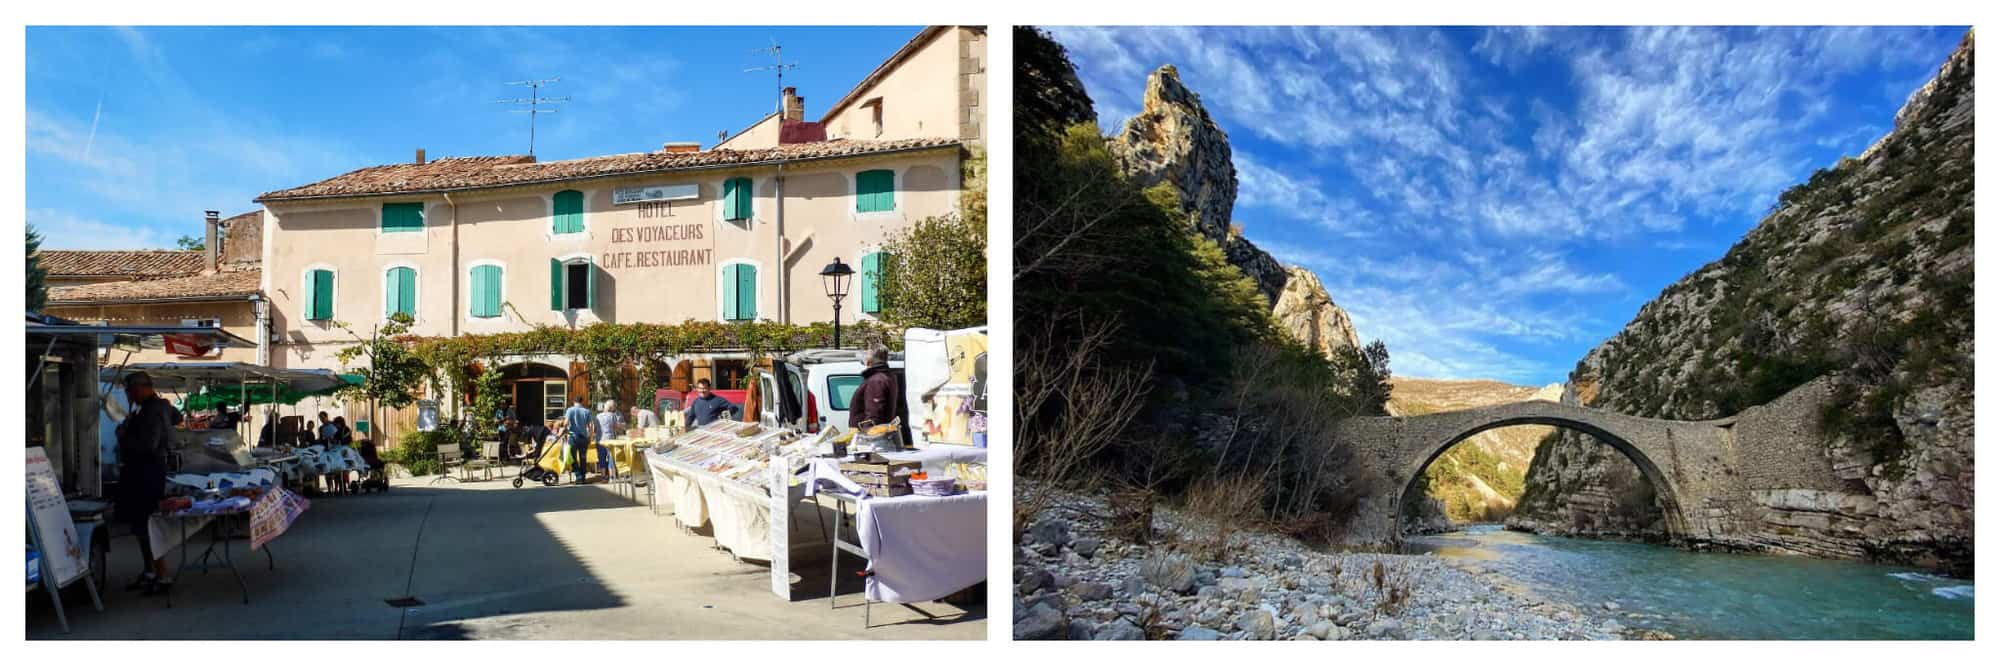 Left: outdoor market in front of a large stone building with light green shutters. There are tables with food and other wares on the right and left side. Right: An arched bridge over a small river. There are rocks and the river is surrounded by mountains on both sides, all set against a partly cloudy but very blue sky.